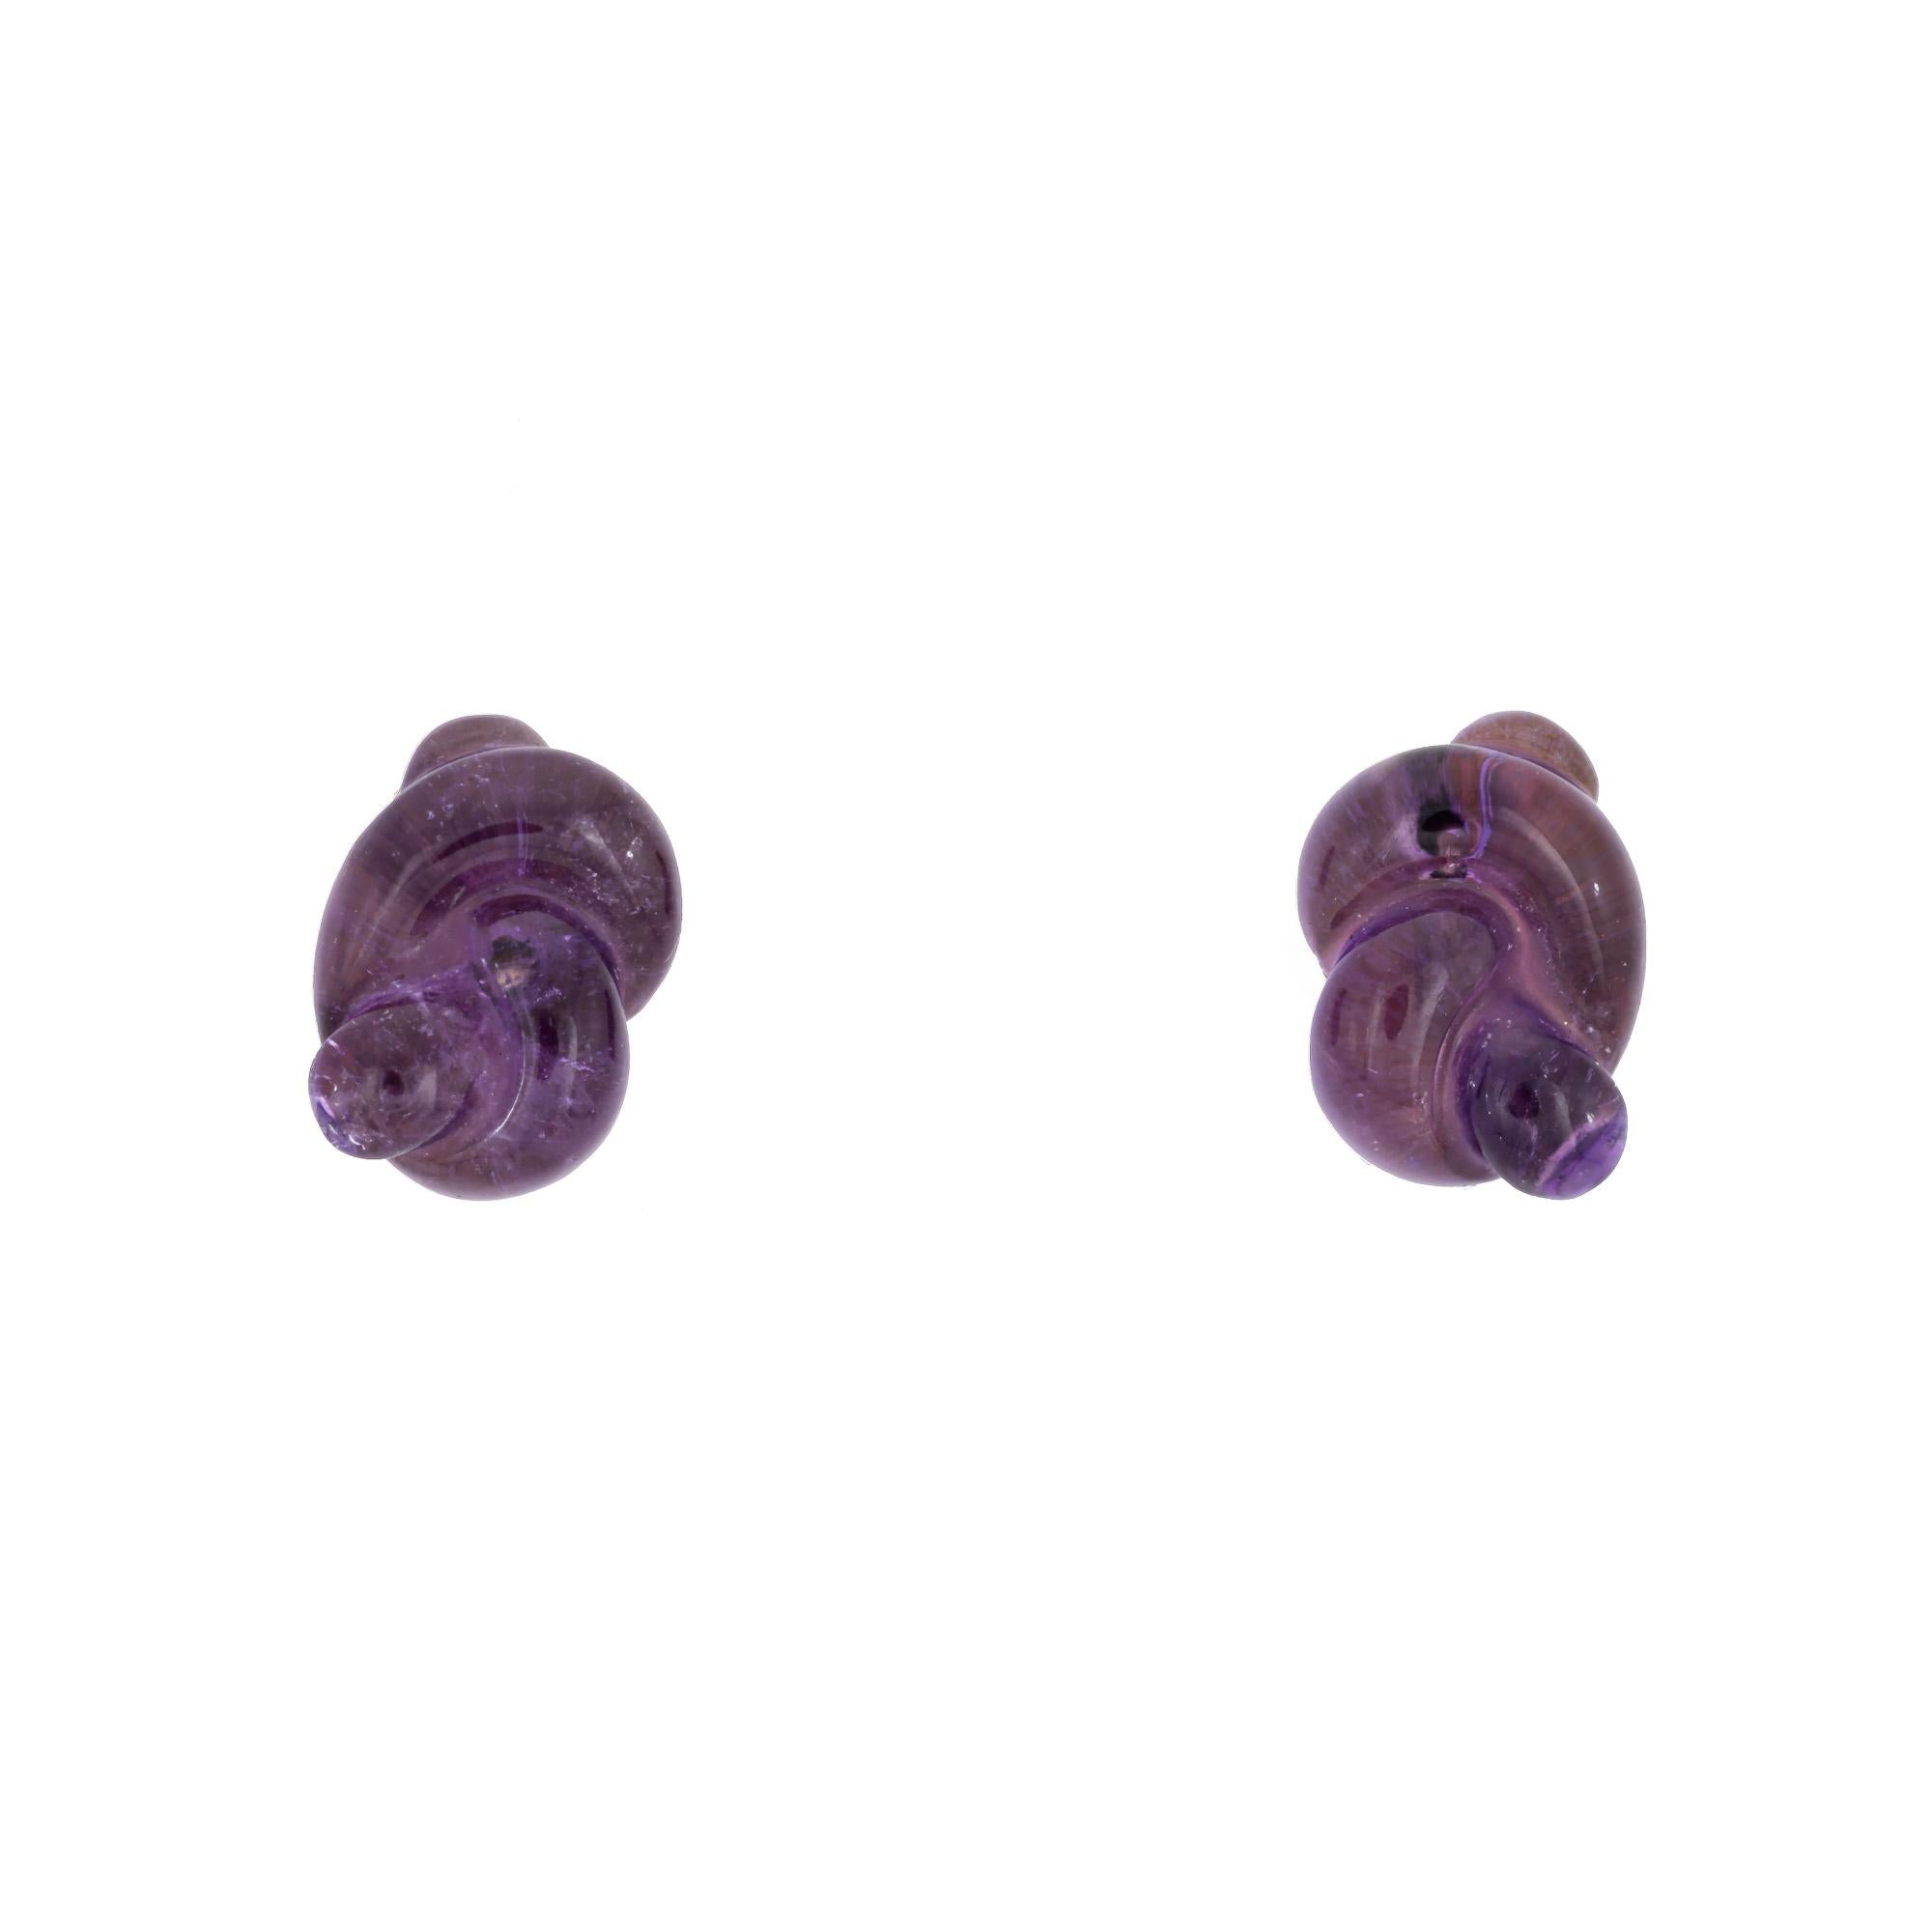 Finely detailed pair of vintage Tiffany & Co amethyst infinity knot earrings (circa 1979) crafted in 18k yellow gold. 

Amethysts measure 11mm x 7.5mm (in very good condition and free of cracks or chips).

Dating to 1979 the earrings are set with